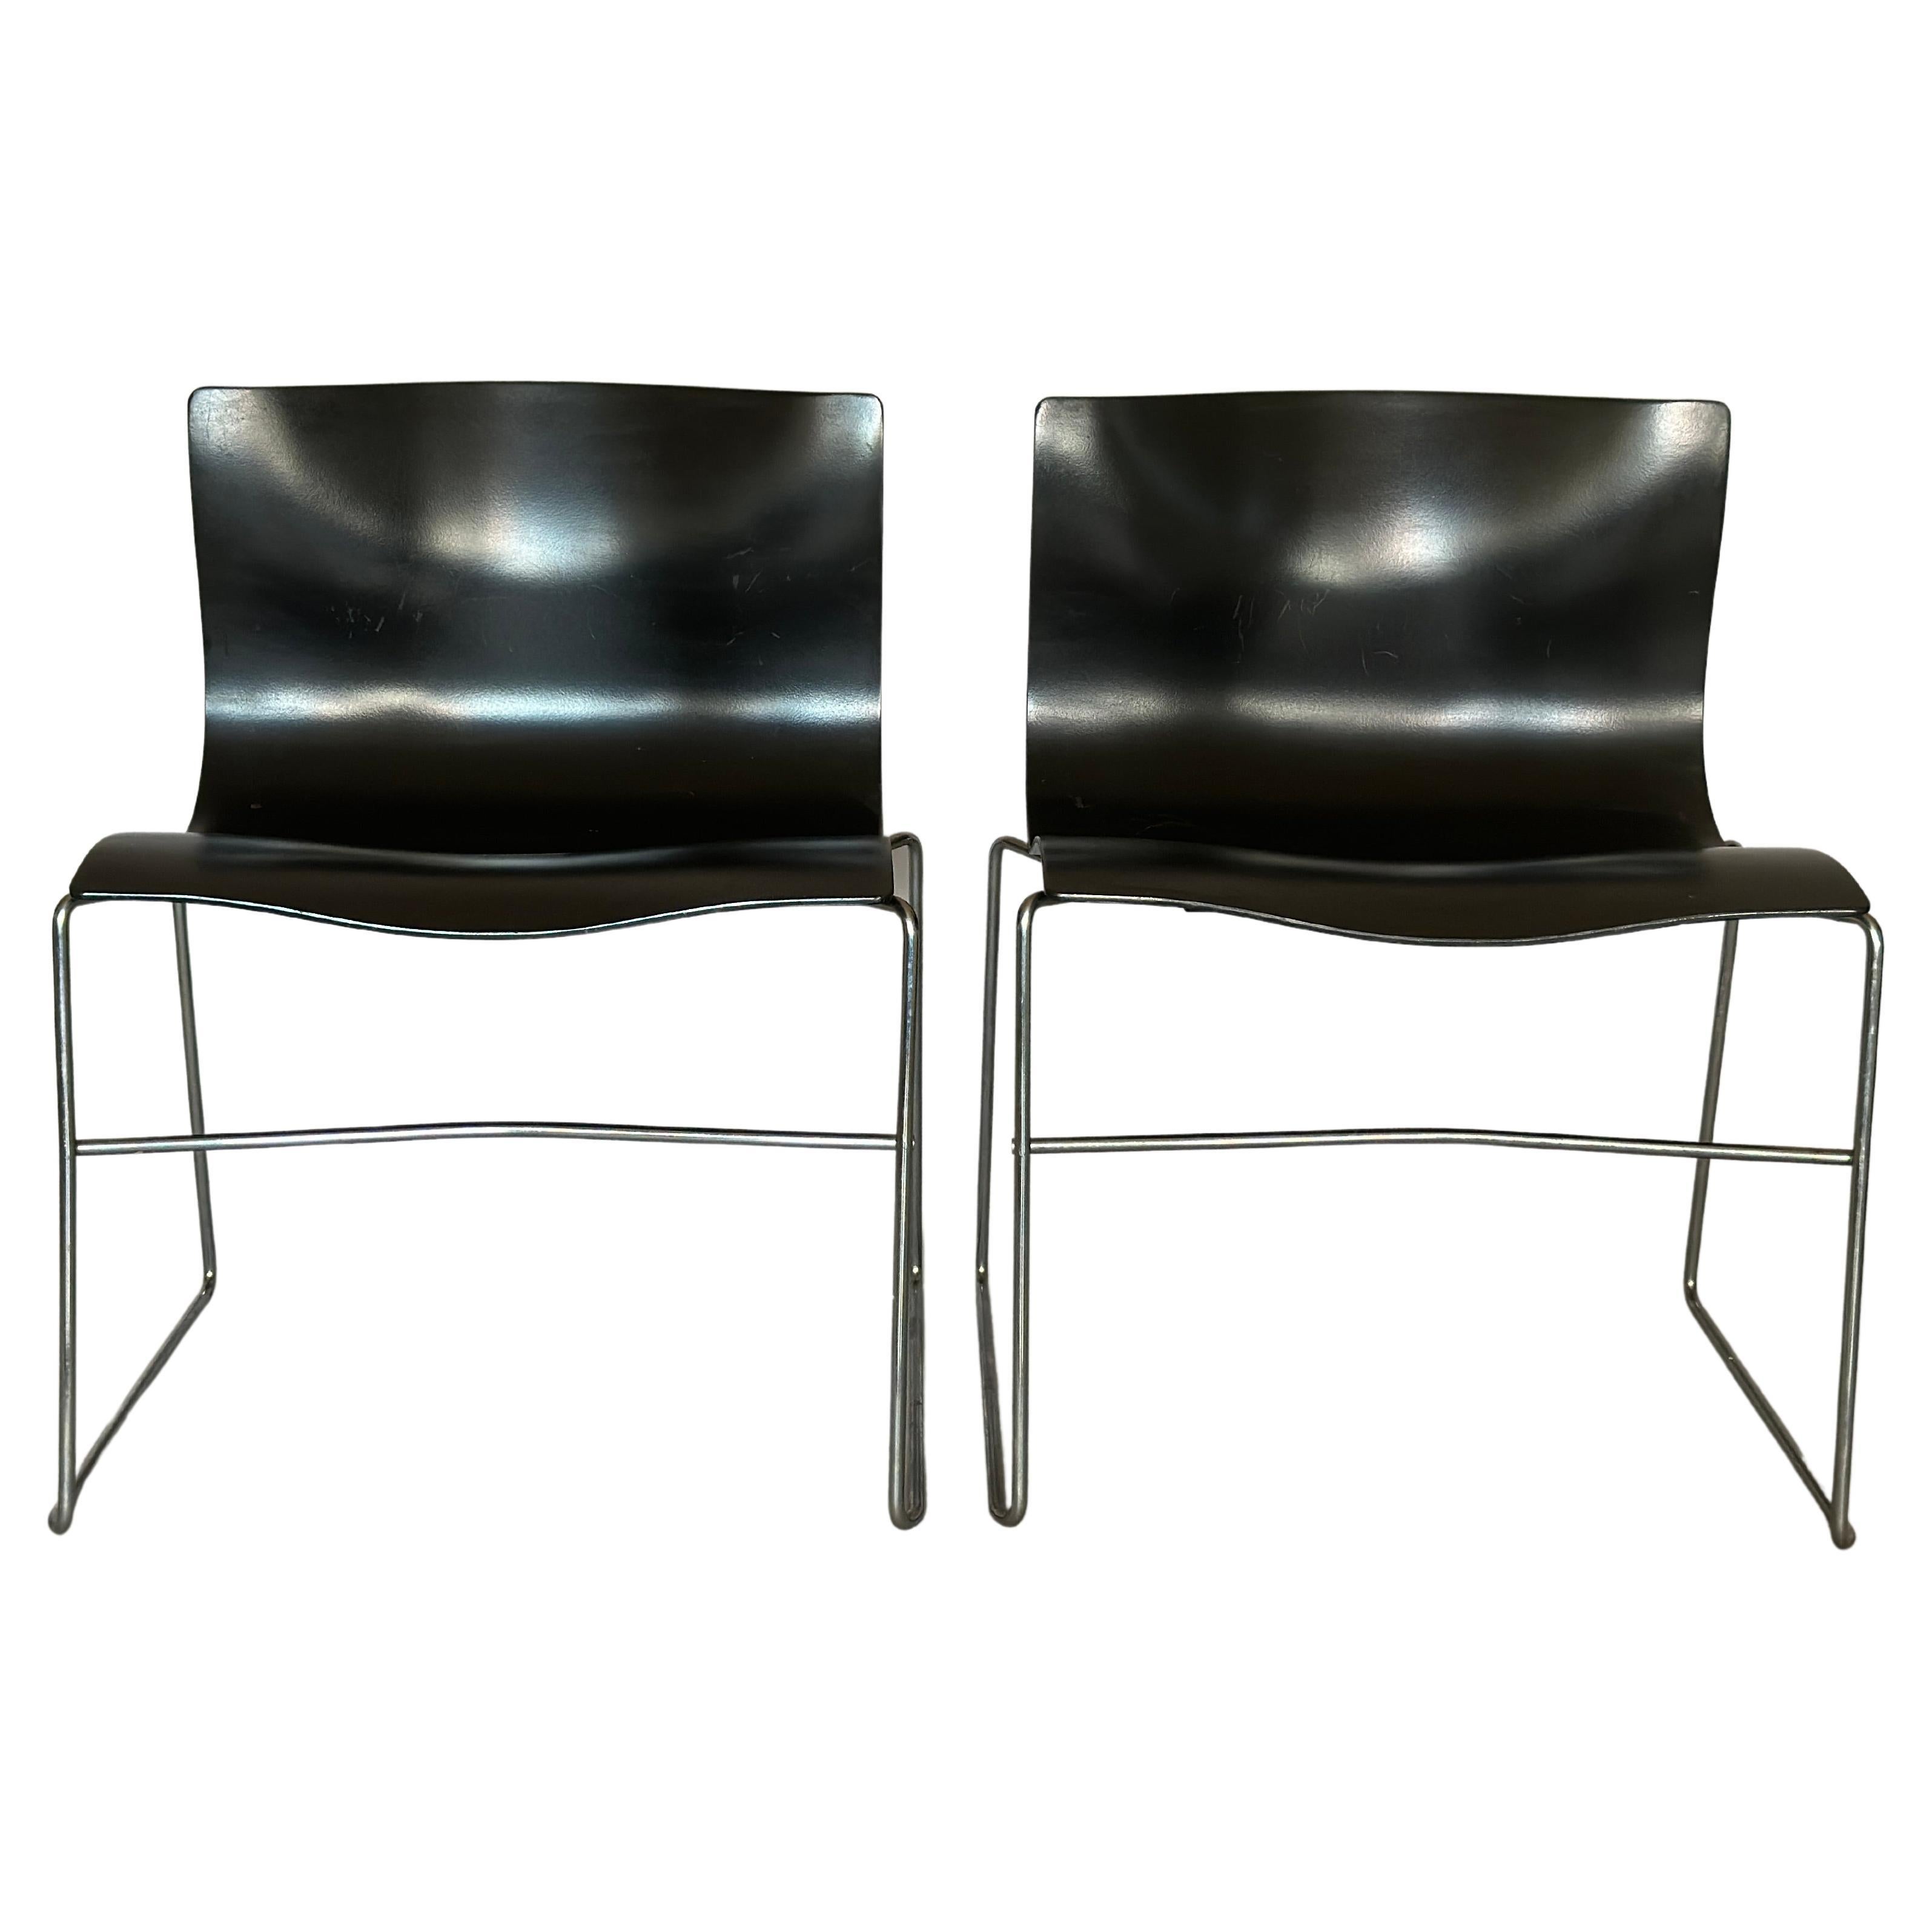 Knoll chairs by Massimo Vagnelli 1985